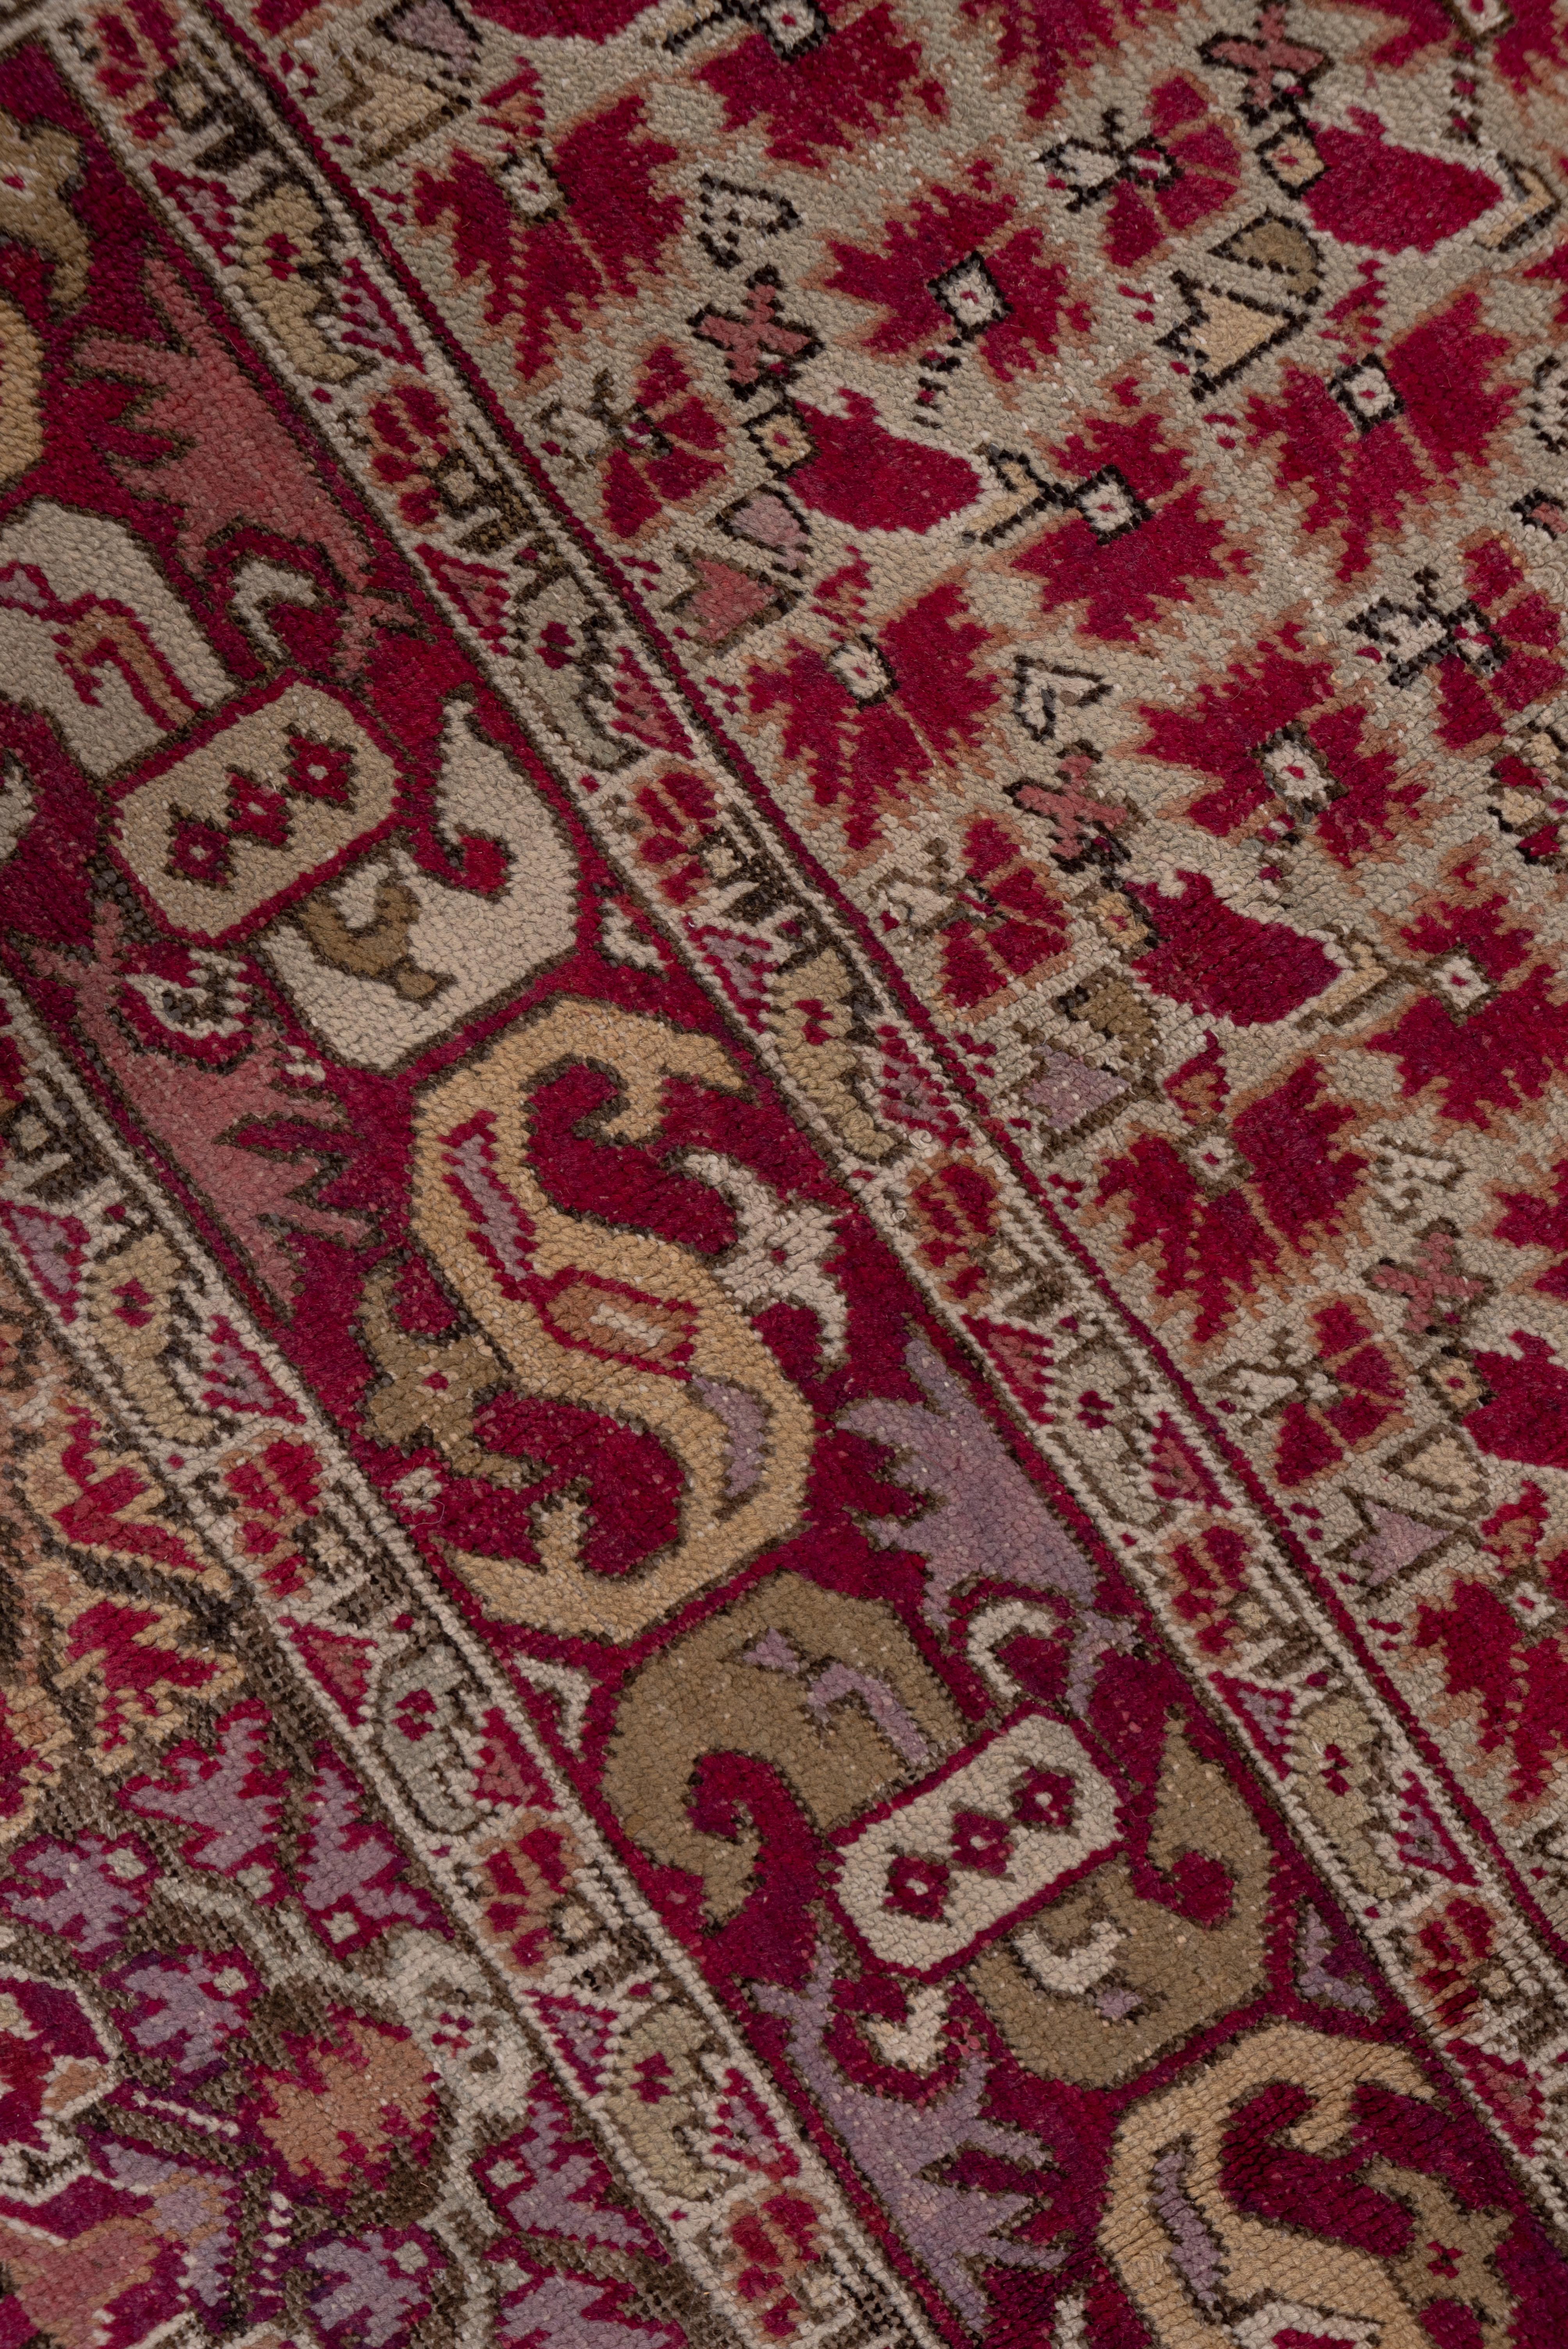 Early 20th Century Finely Woven Antique Turkish Ghiordes Rug, Ruby Red Field, circa 1900s For Sale